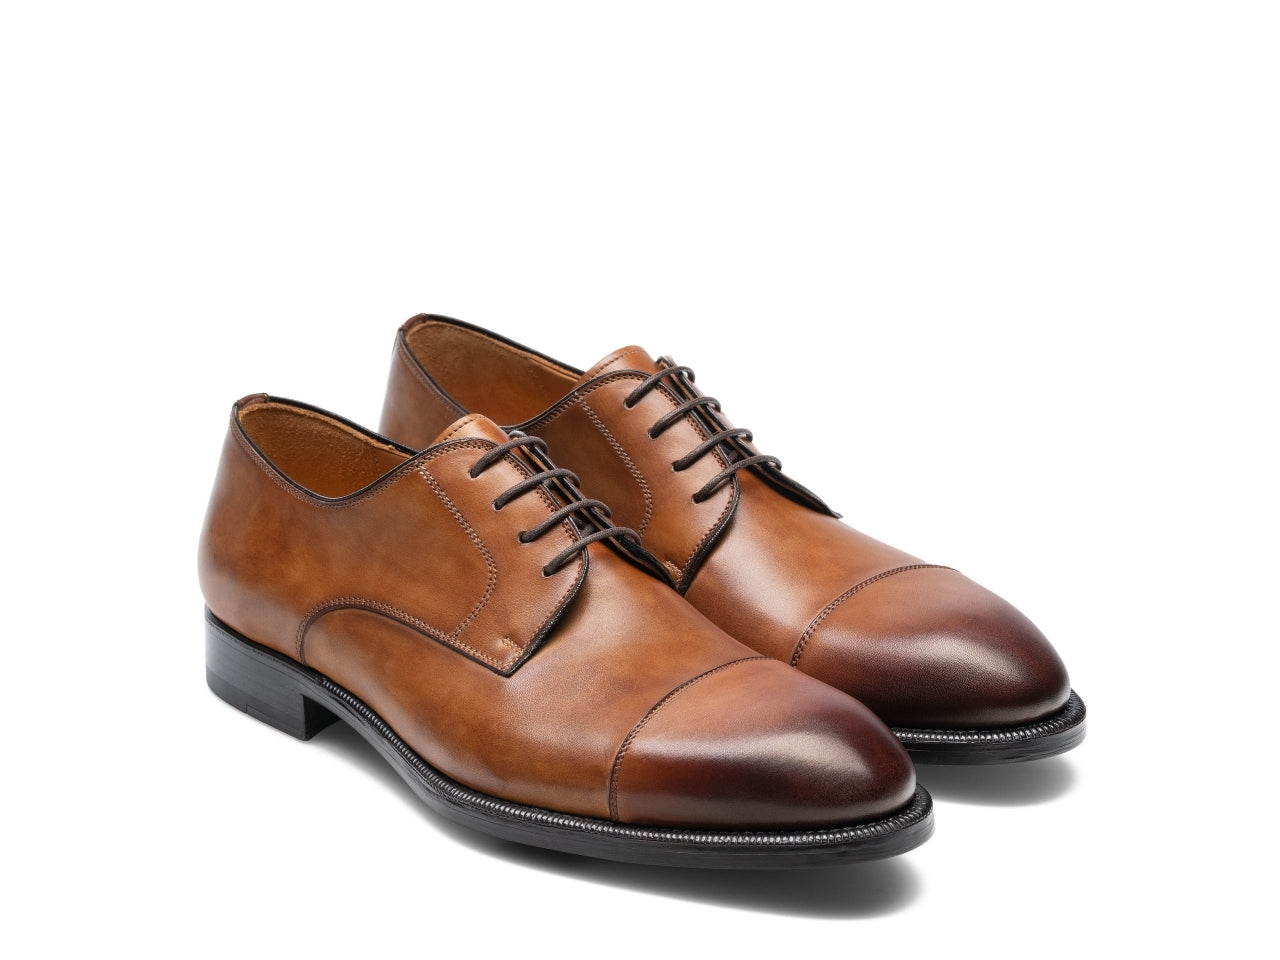 City Chic: Magnanni Shoes NYC